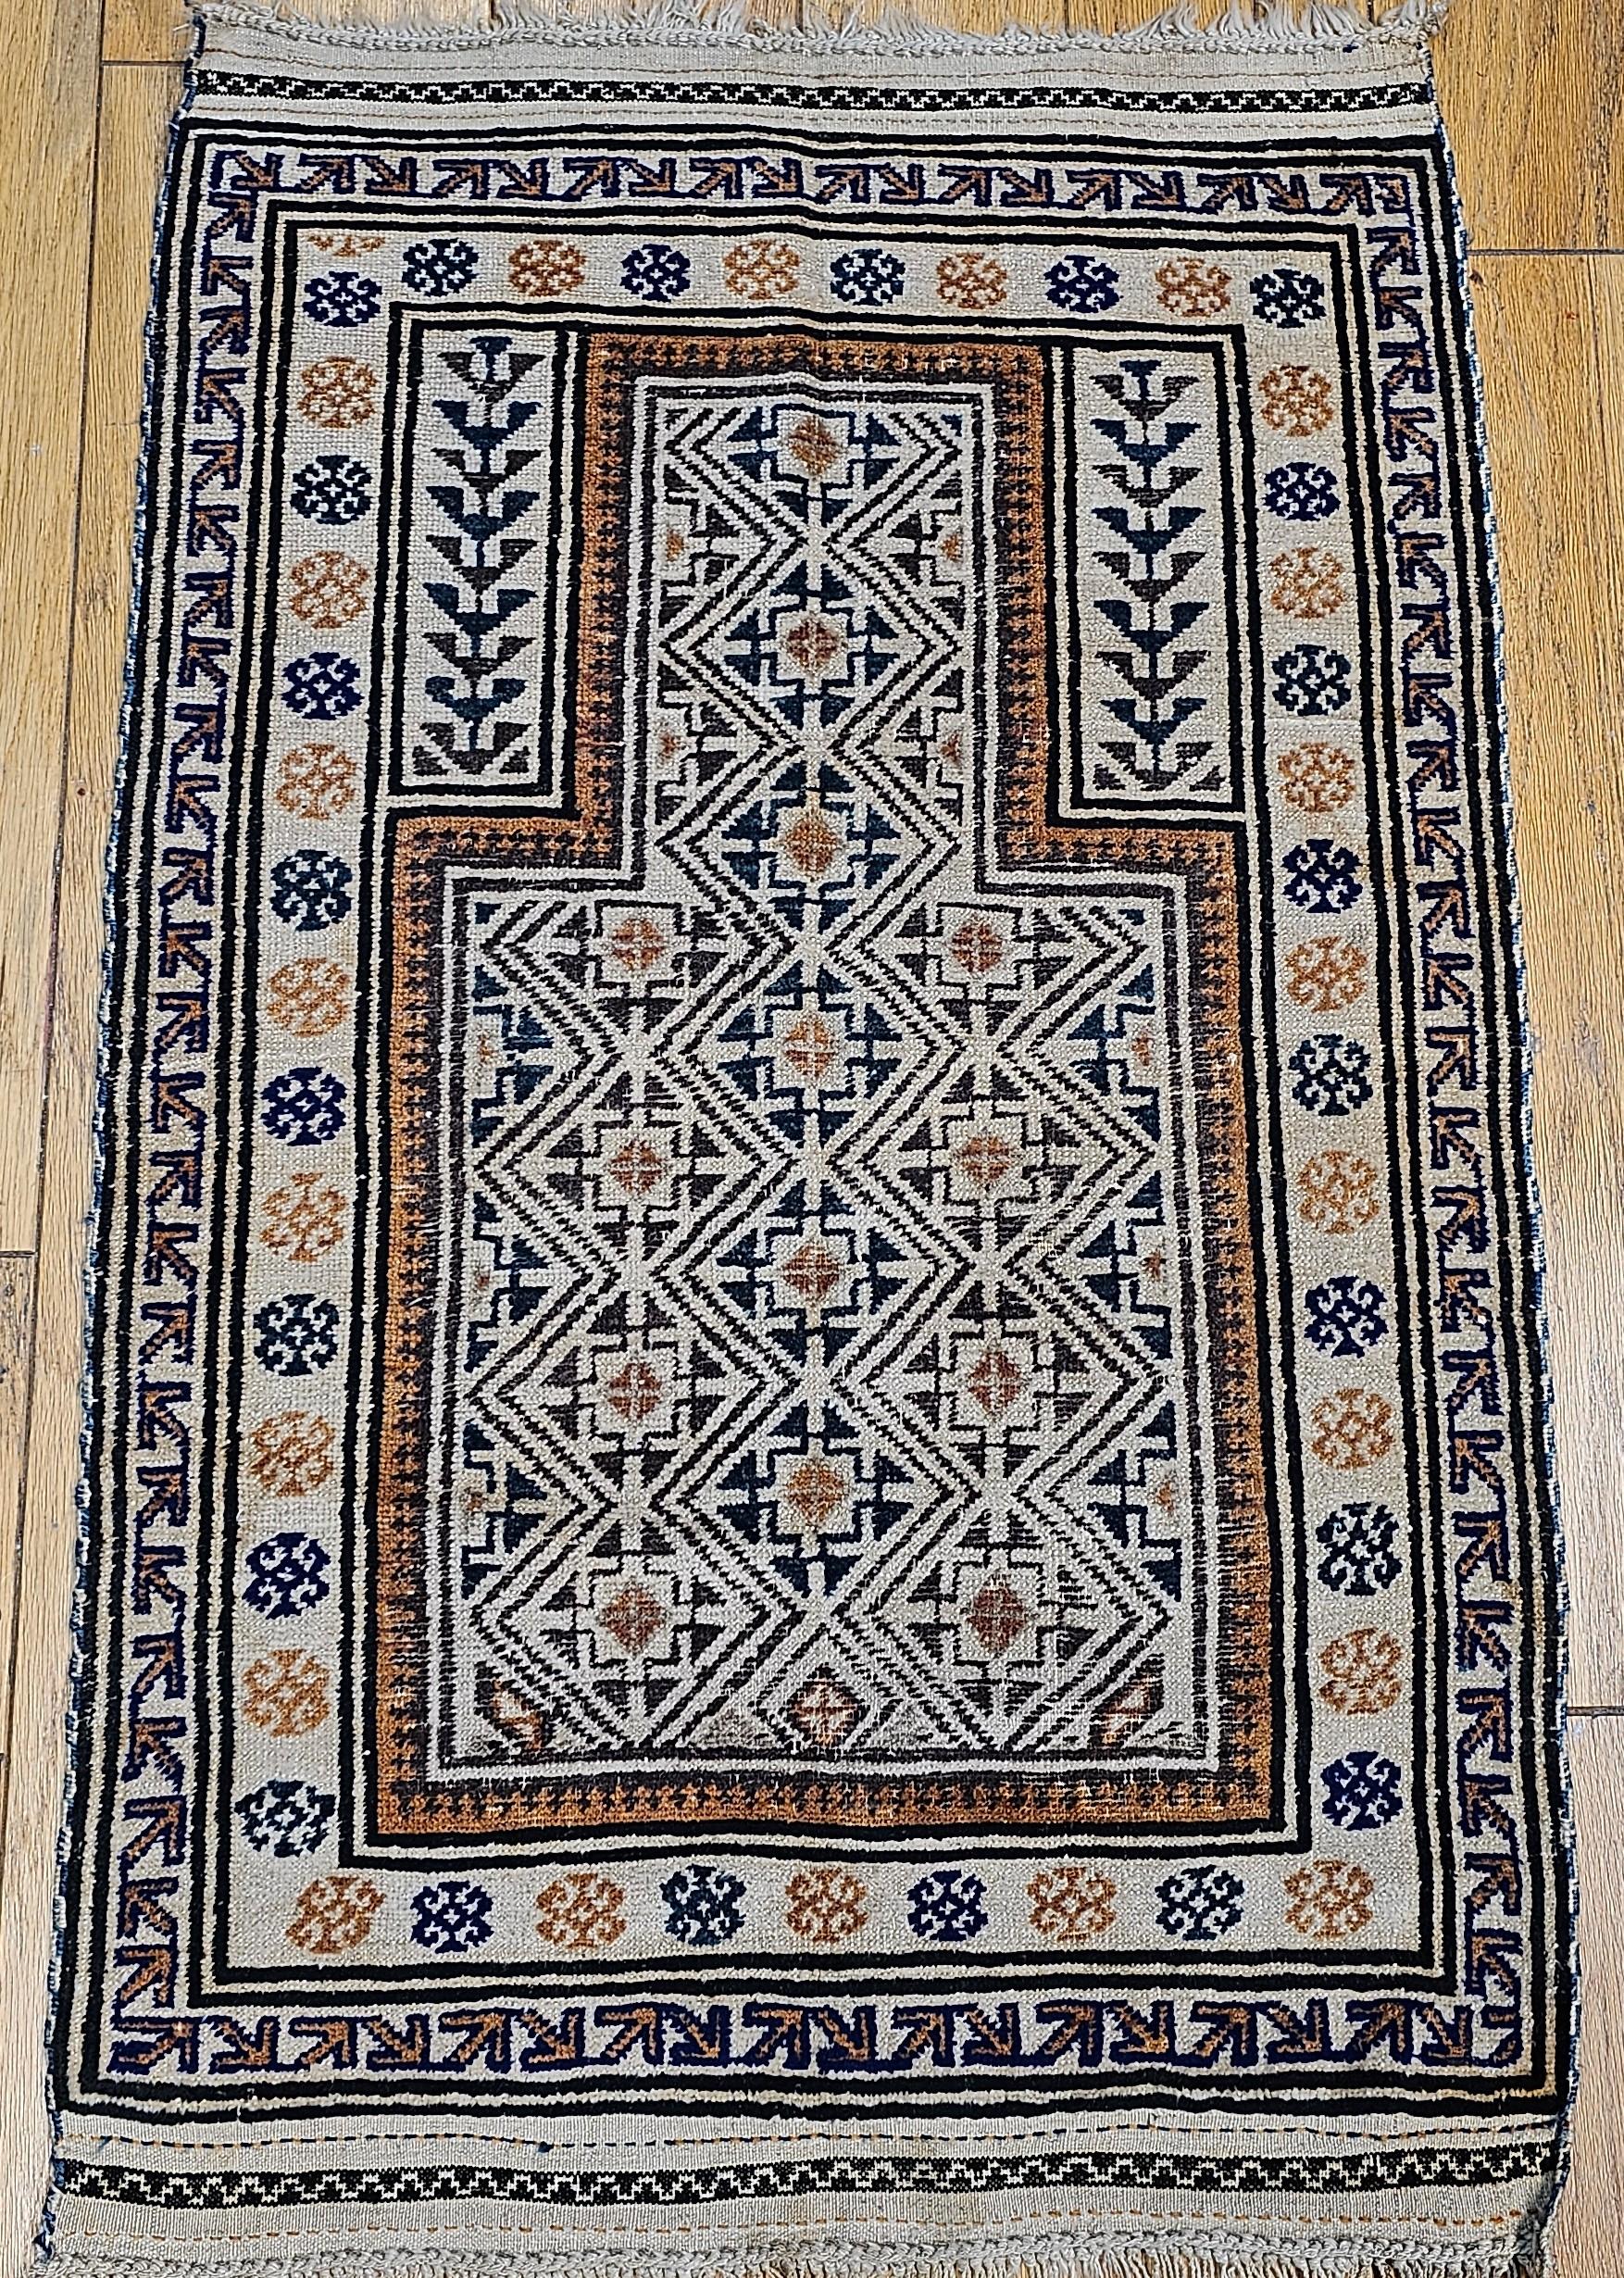 Early 1900s Persian Baluch area rug in a 